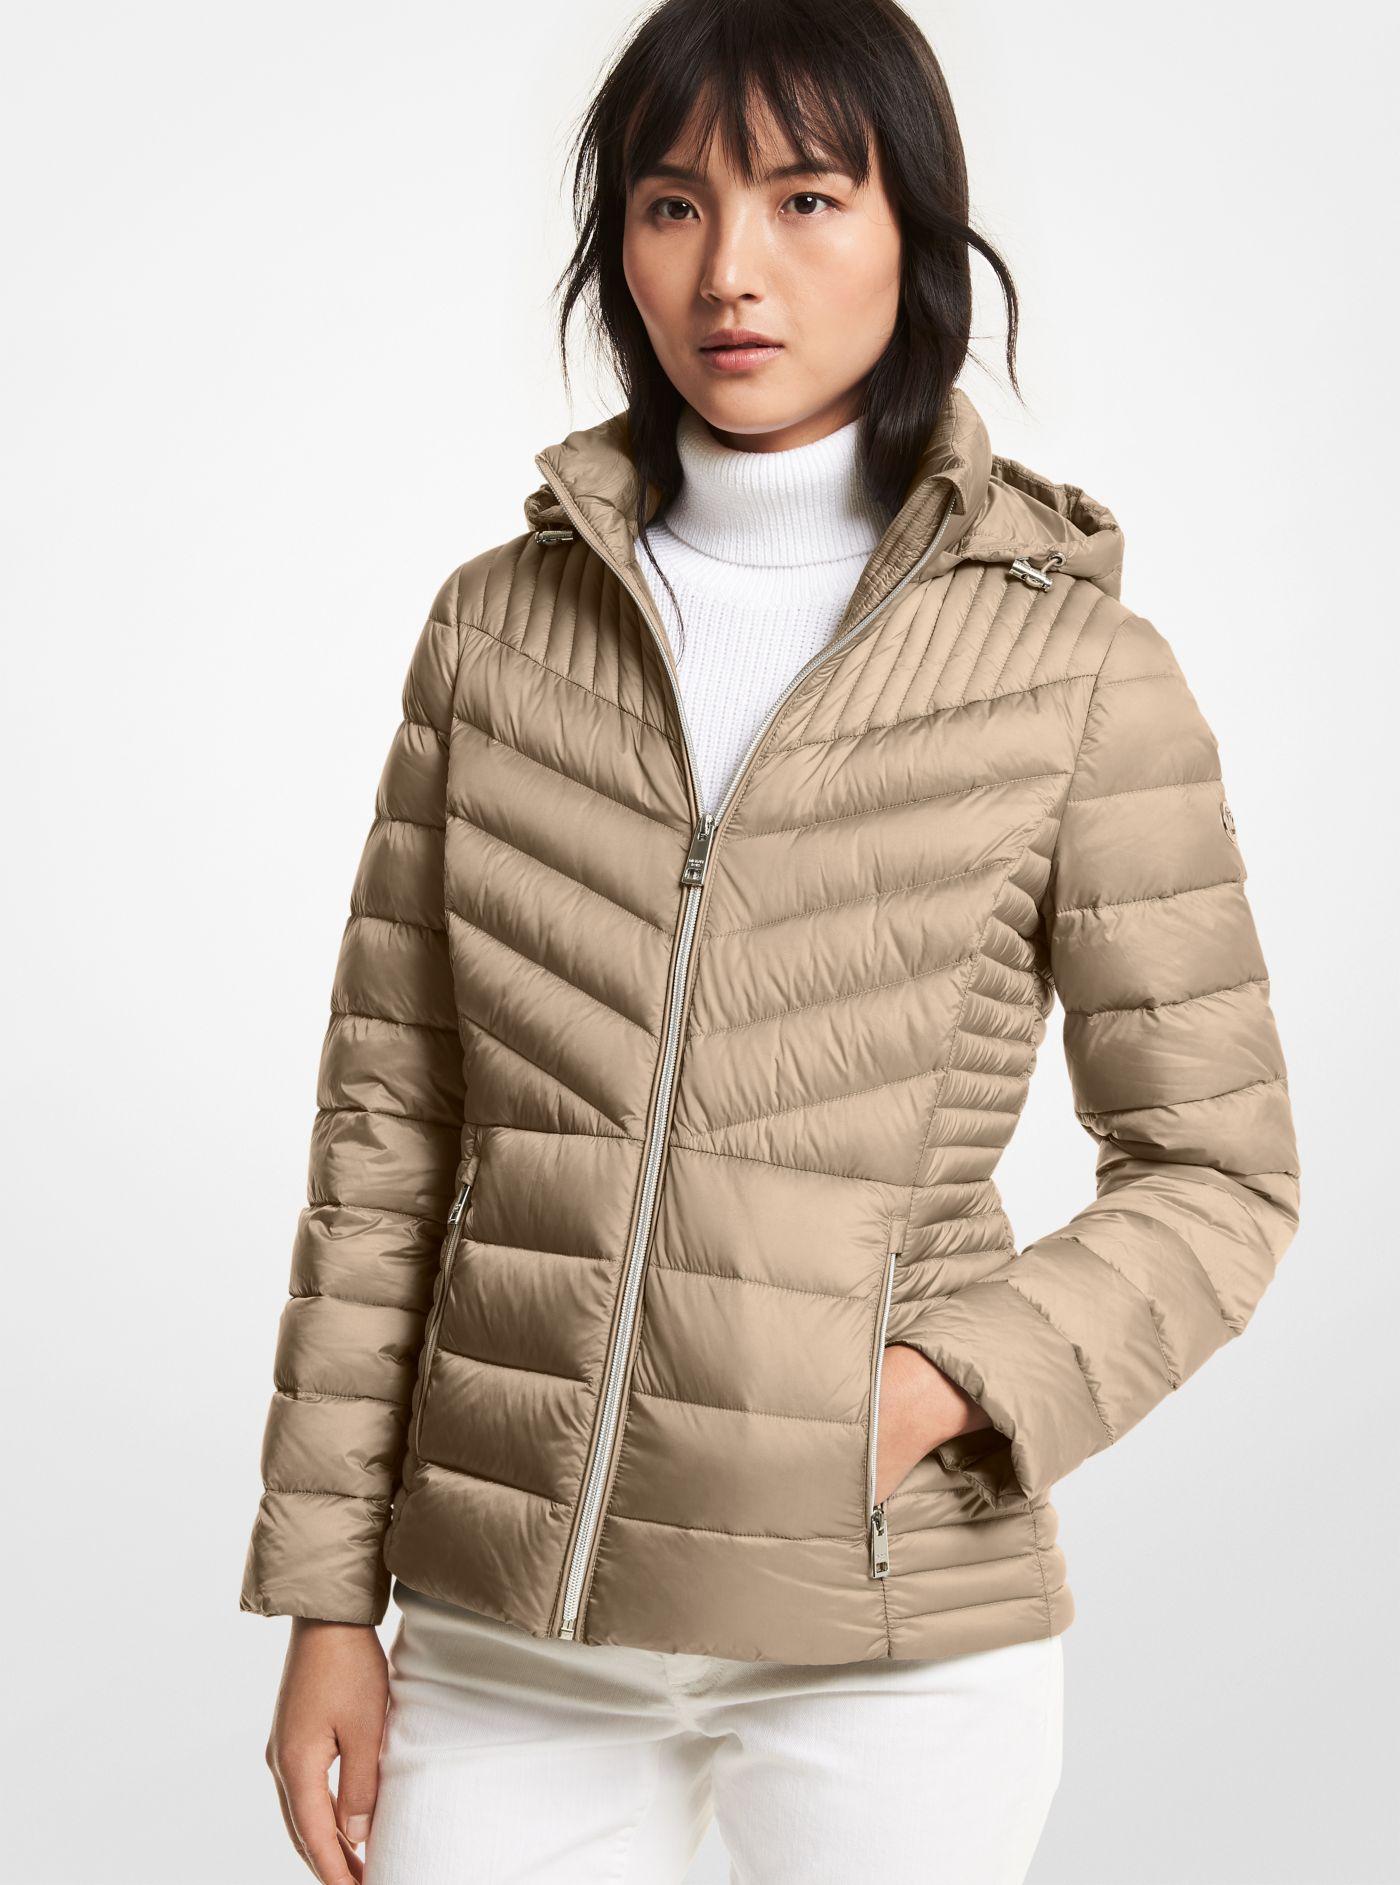 Michael Kors Quilted Nylon Packable Puffer Jacket in Natural | Lyst  Australia